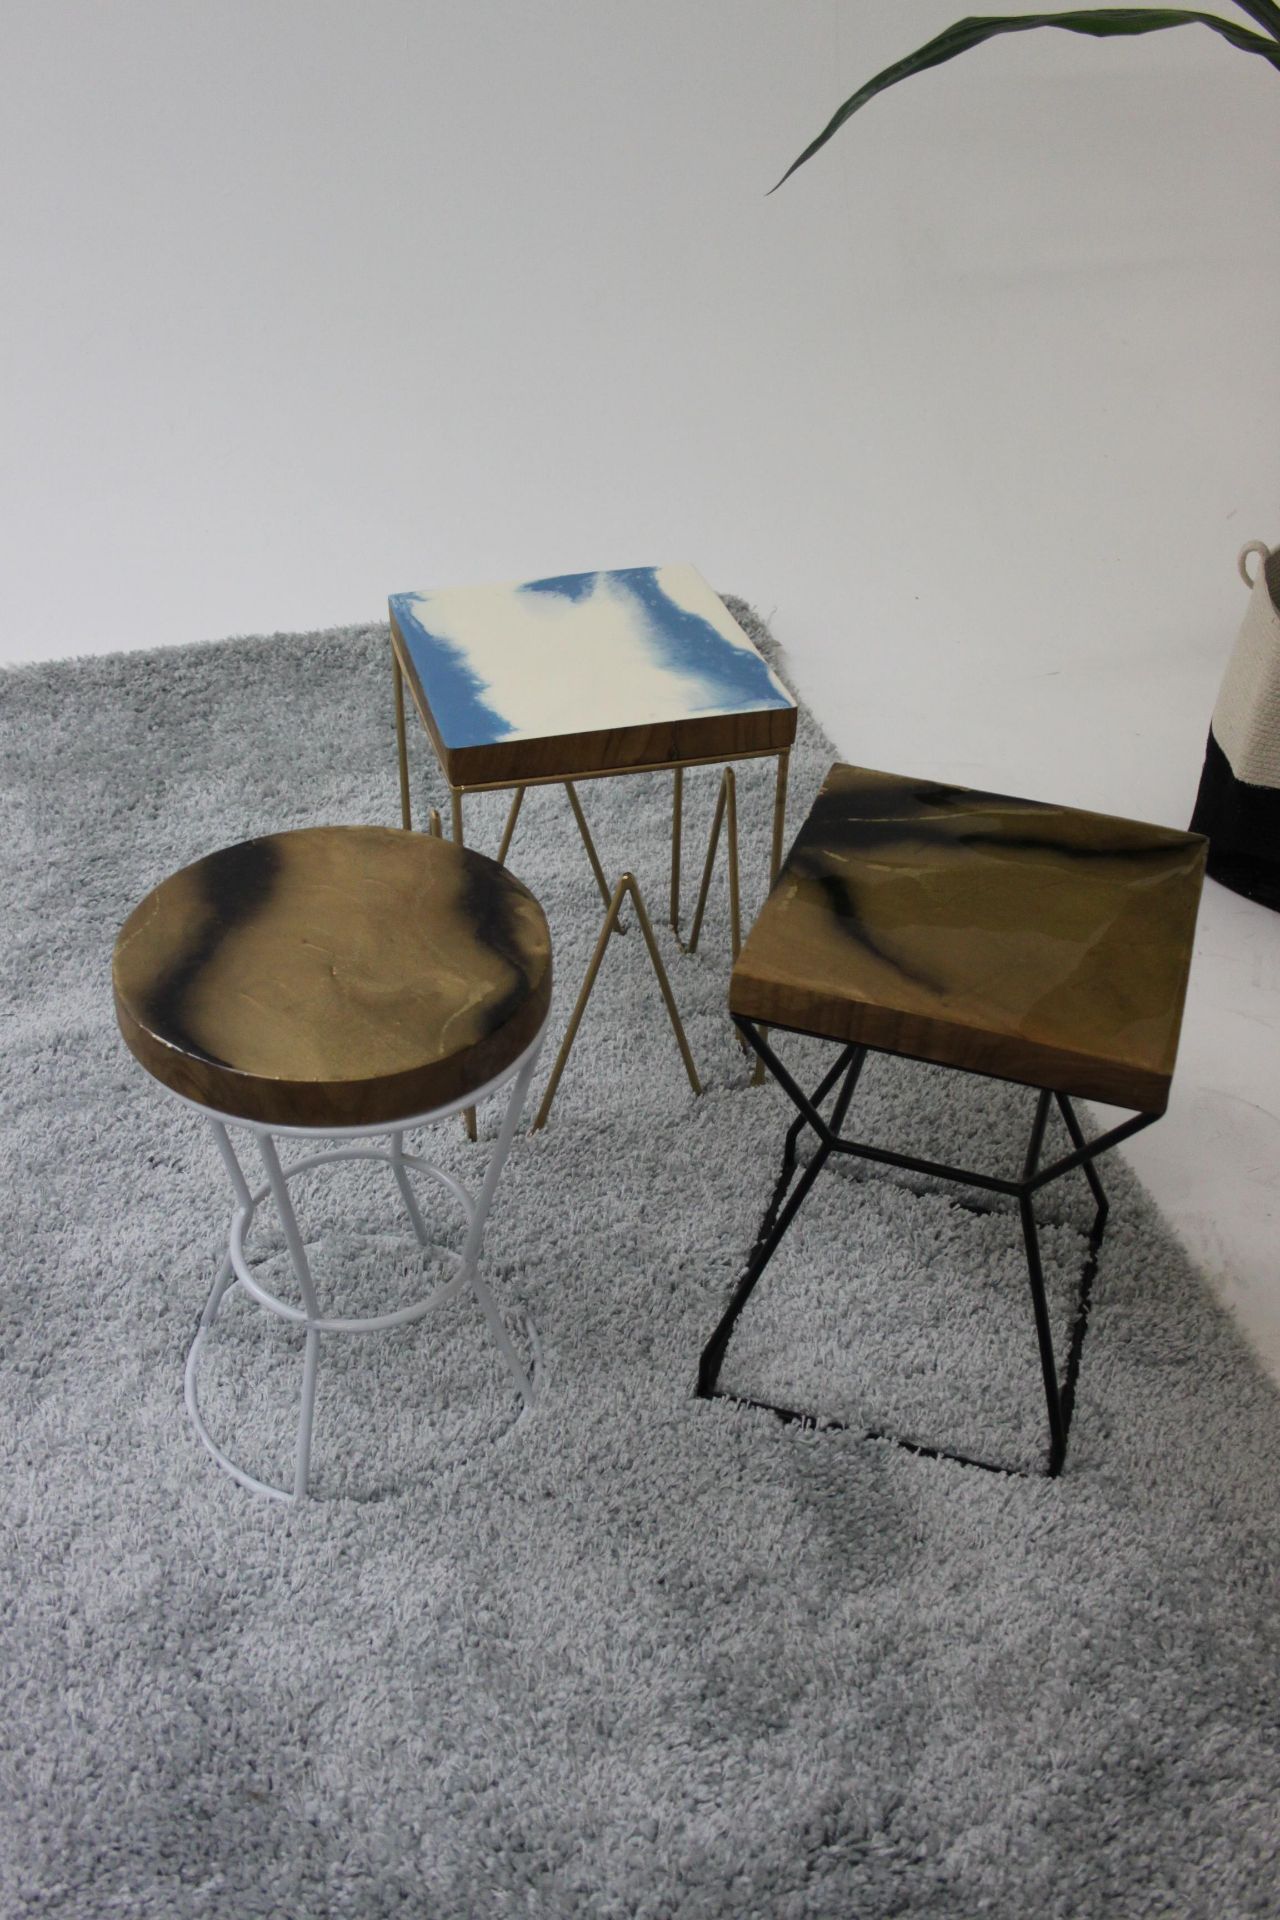 Resin Top Stools (Set Of 3) Each Urethane Resin Top Is Handmade Meaning No Two Stools Will Be - Image 3 of 4